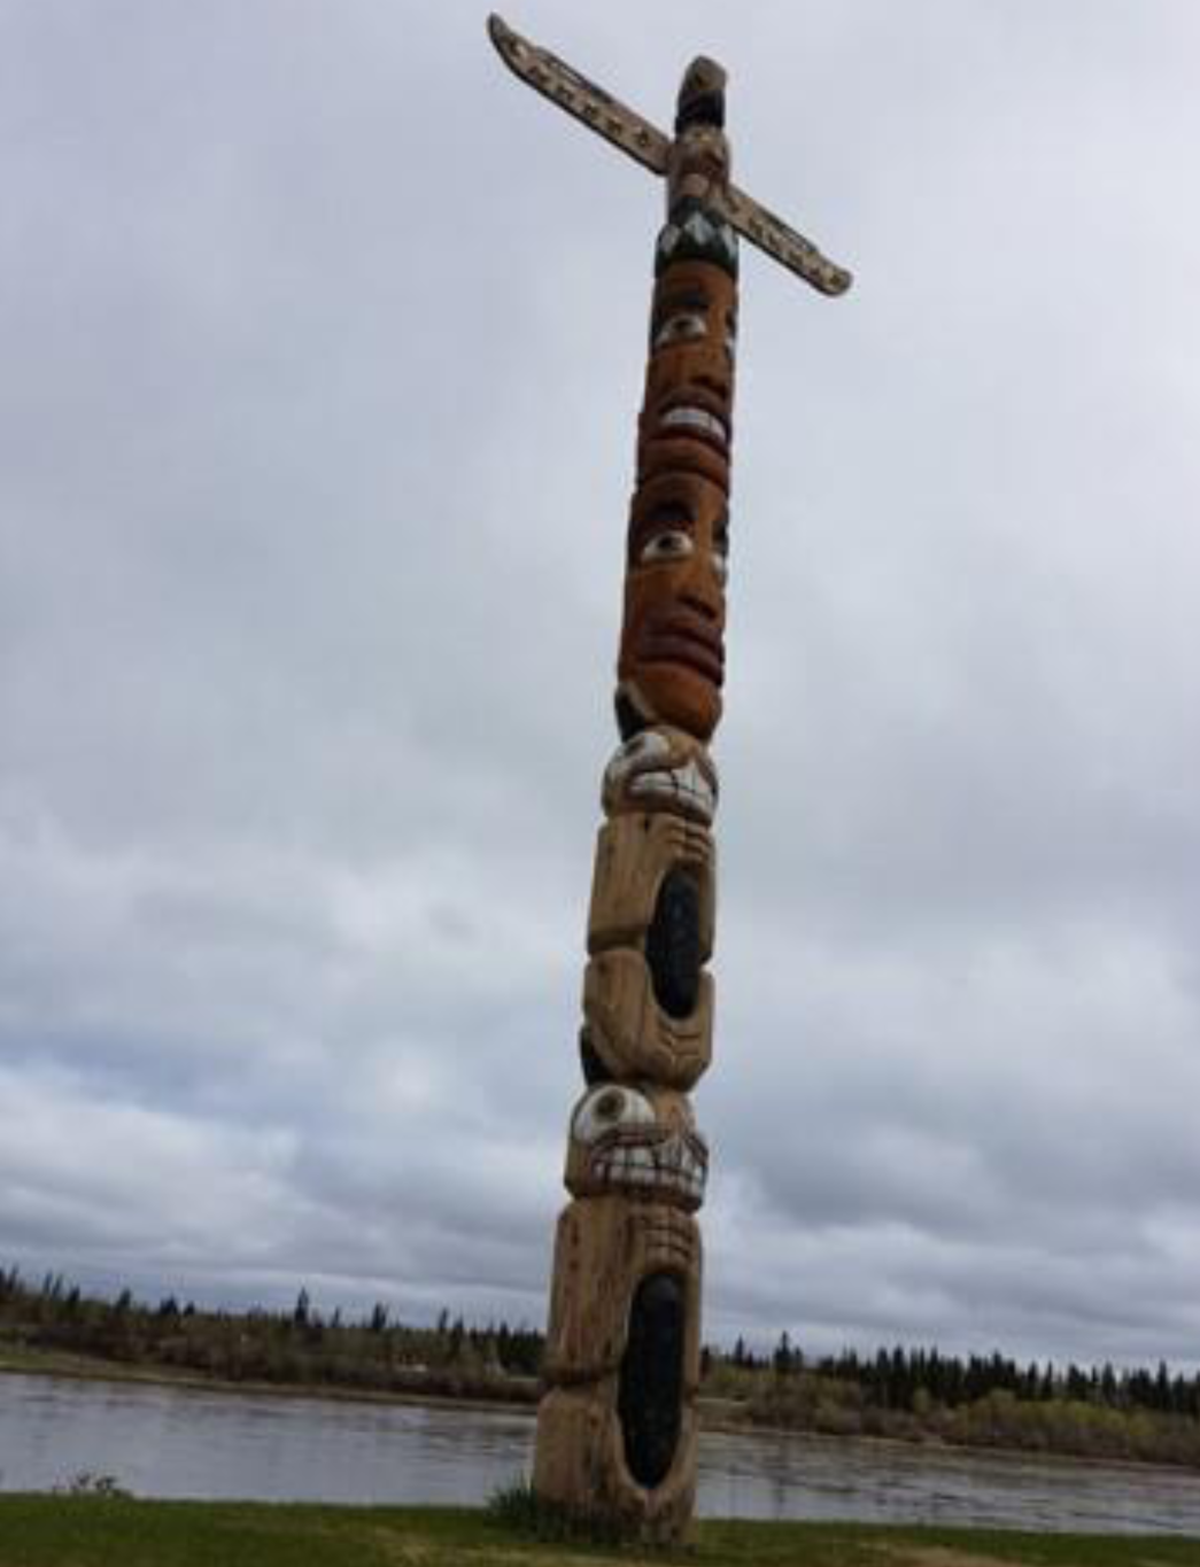 Totem pole at the water’s edge